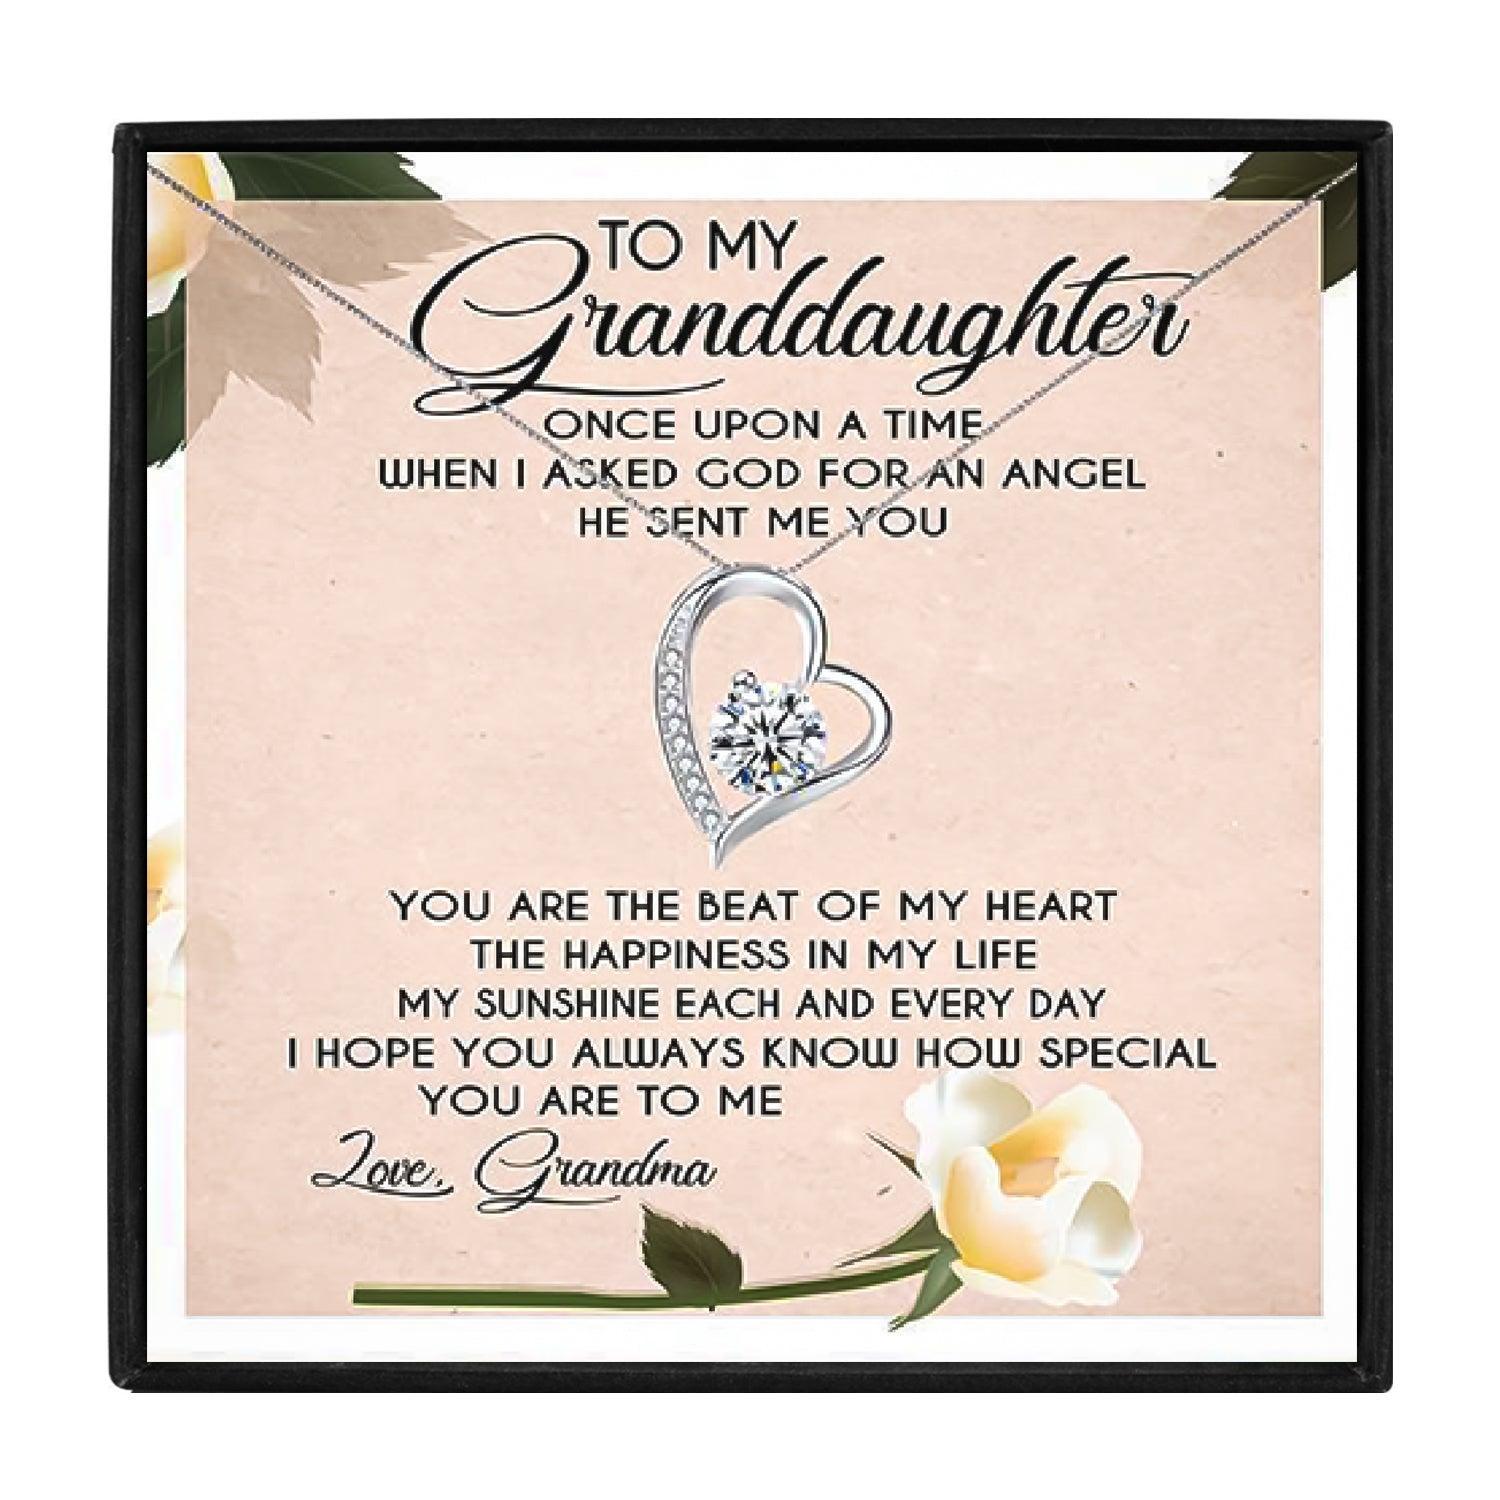 To My Granddaughter Necklace From Grandma for Christmas 2023 | To My Granddaughter Necklace From Grandma - undefined | Granddaughter, Hollow Heart Pendant Necklace, necklace, To My Granddaughter, To My Granddaughter Hollow Heart Pendant Necklace 002 | From Hunny Life | hunnylife.com